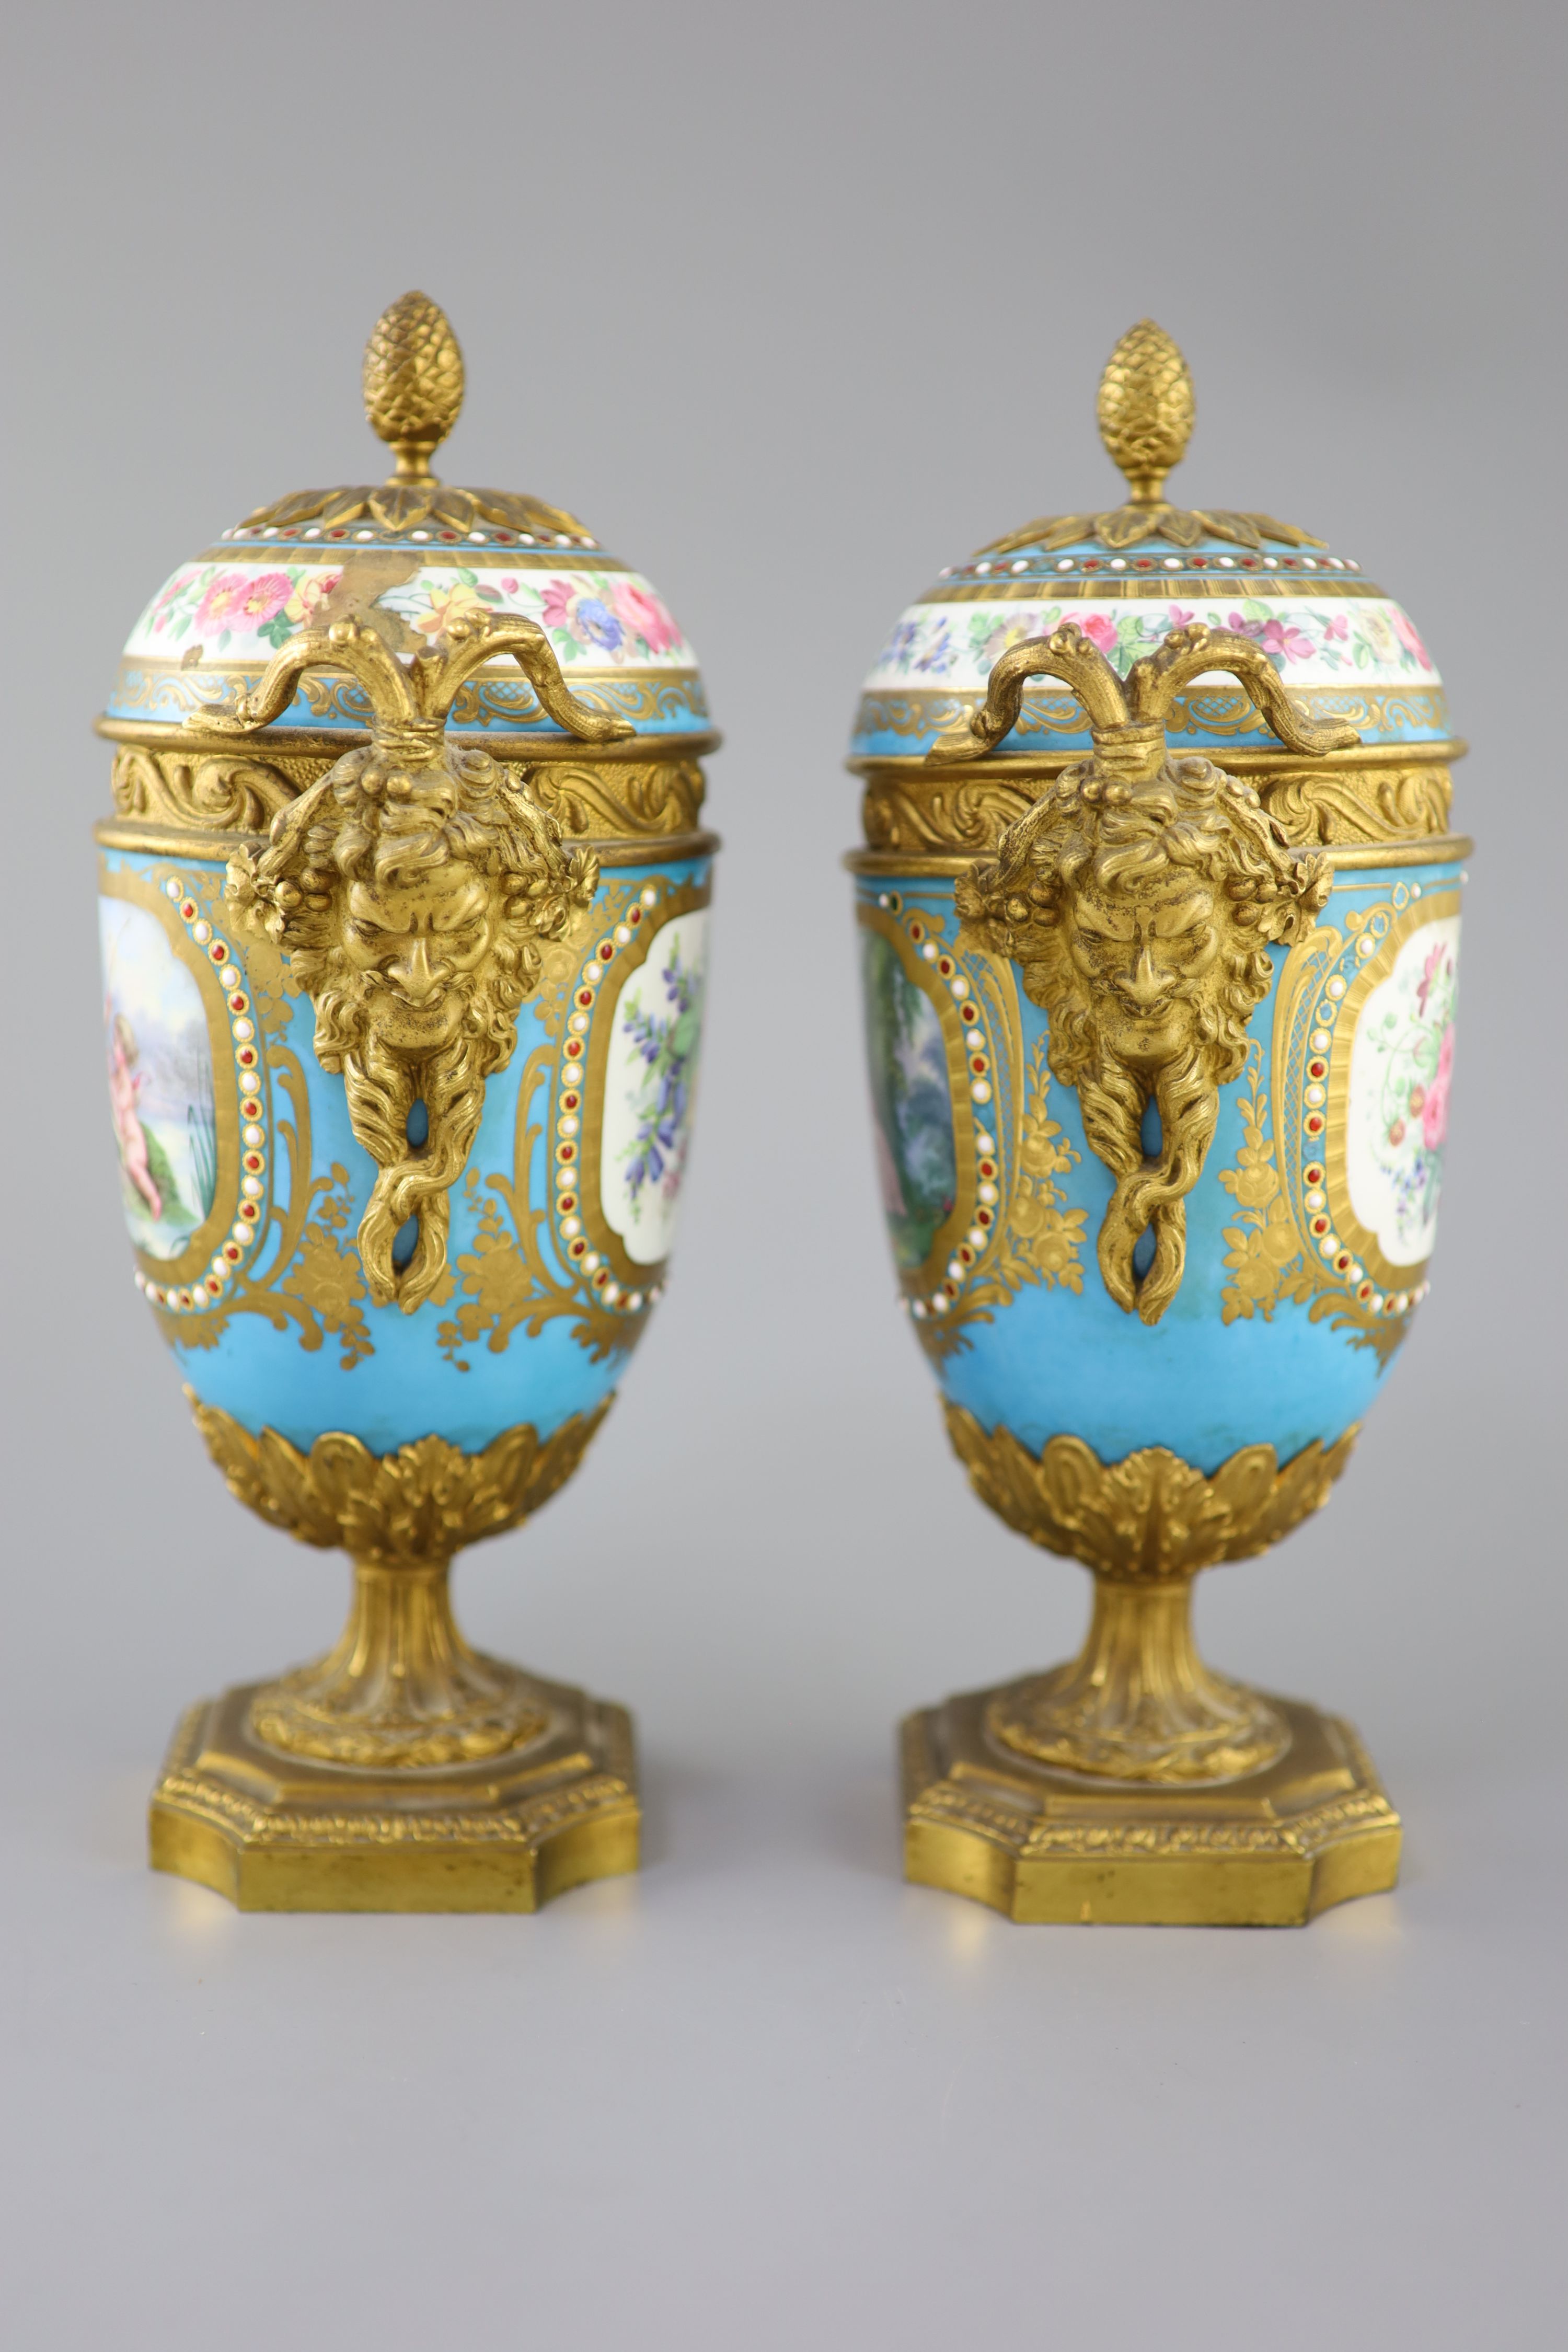 A pair of French Sevres style porcelain and ormolu mounted vases and covers, 19th century, 27cm high